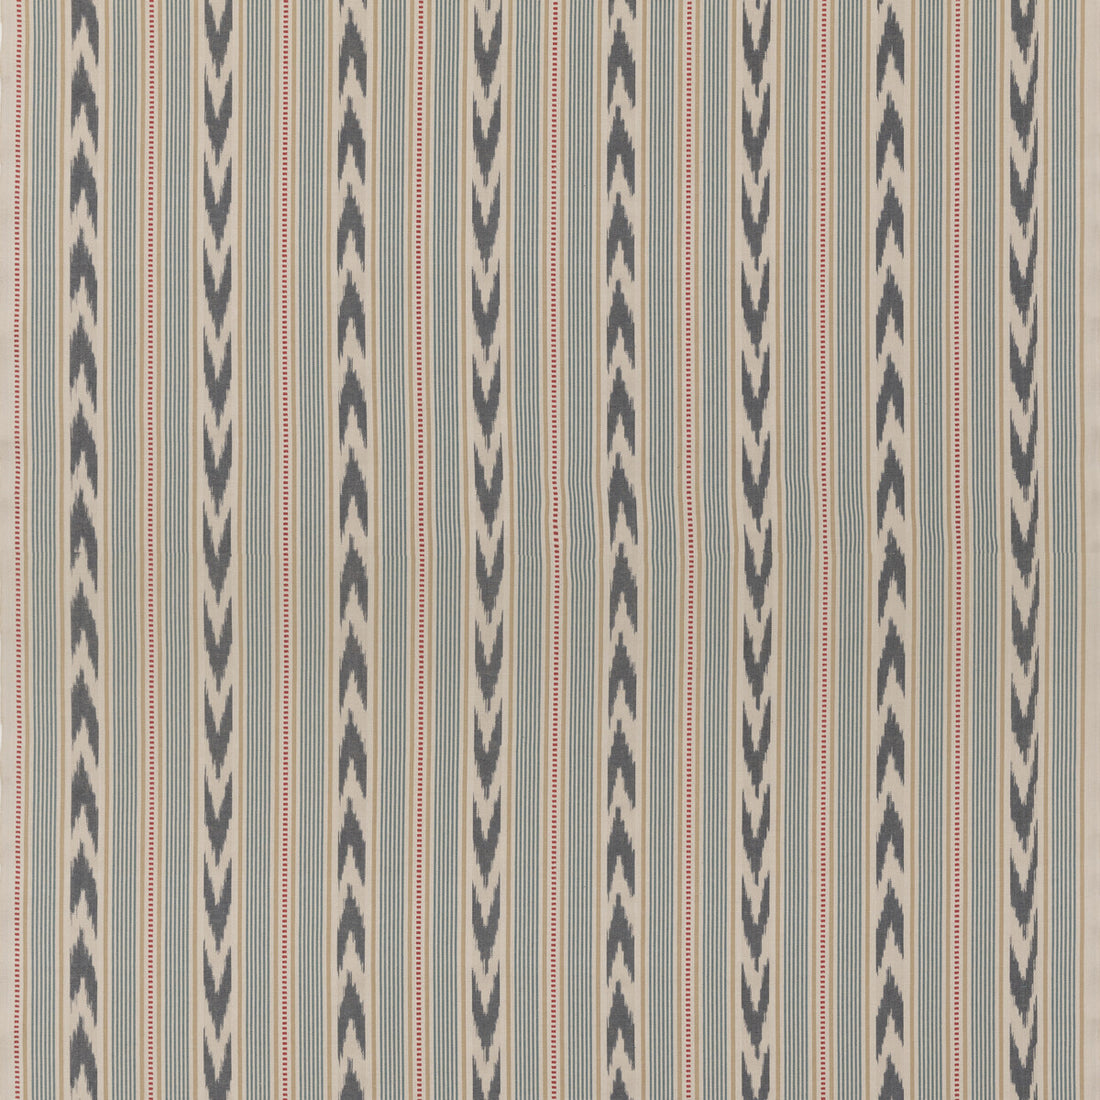 Newport Stripe fabric in blue/red color - pattern FD821.G103.0 - by Mulberry in the Westerly Stripes collection